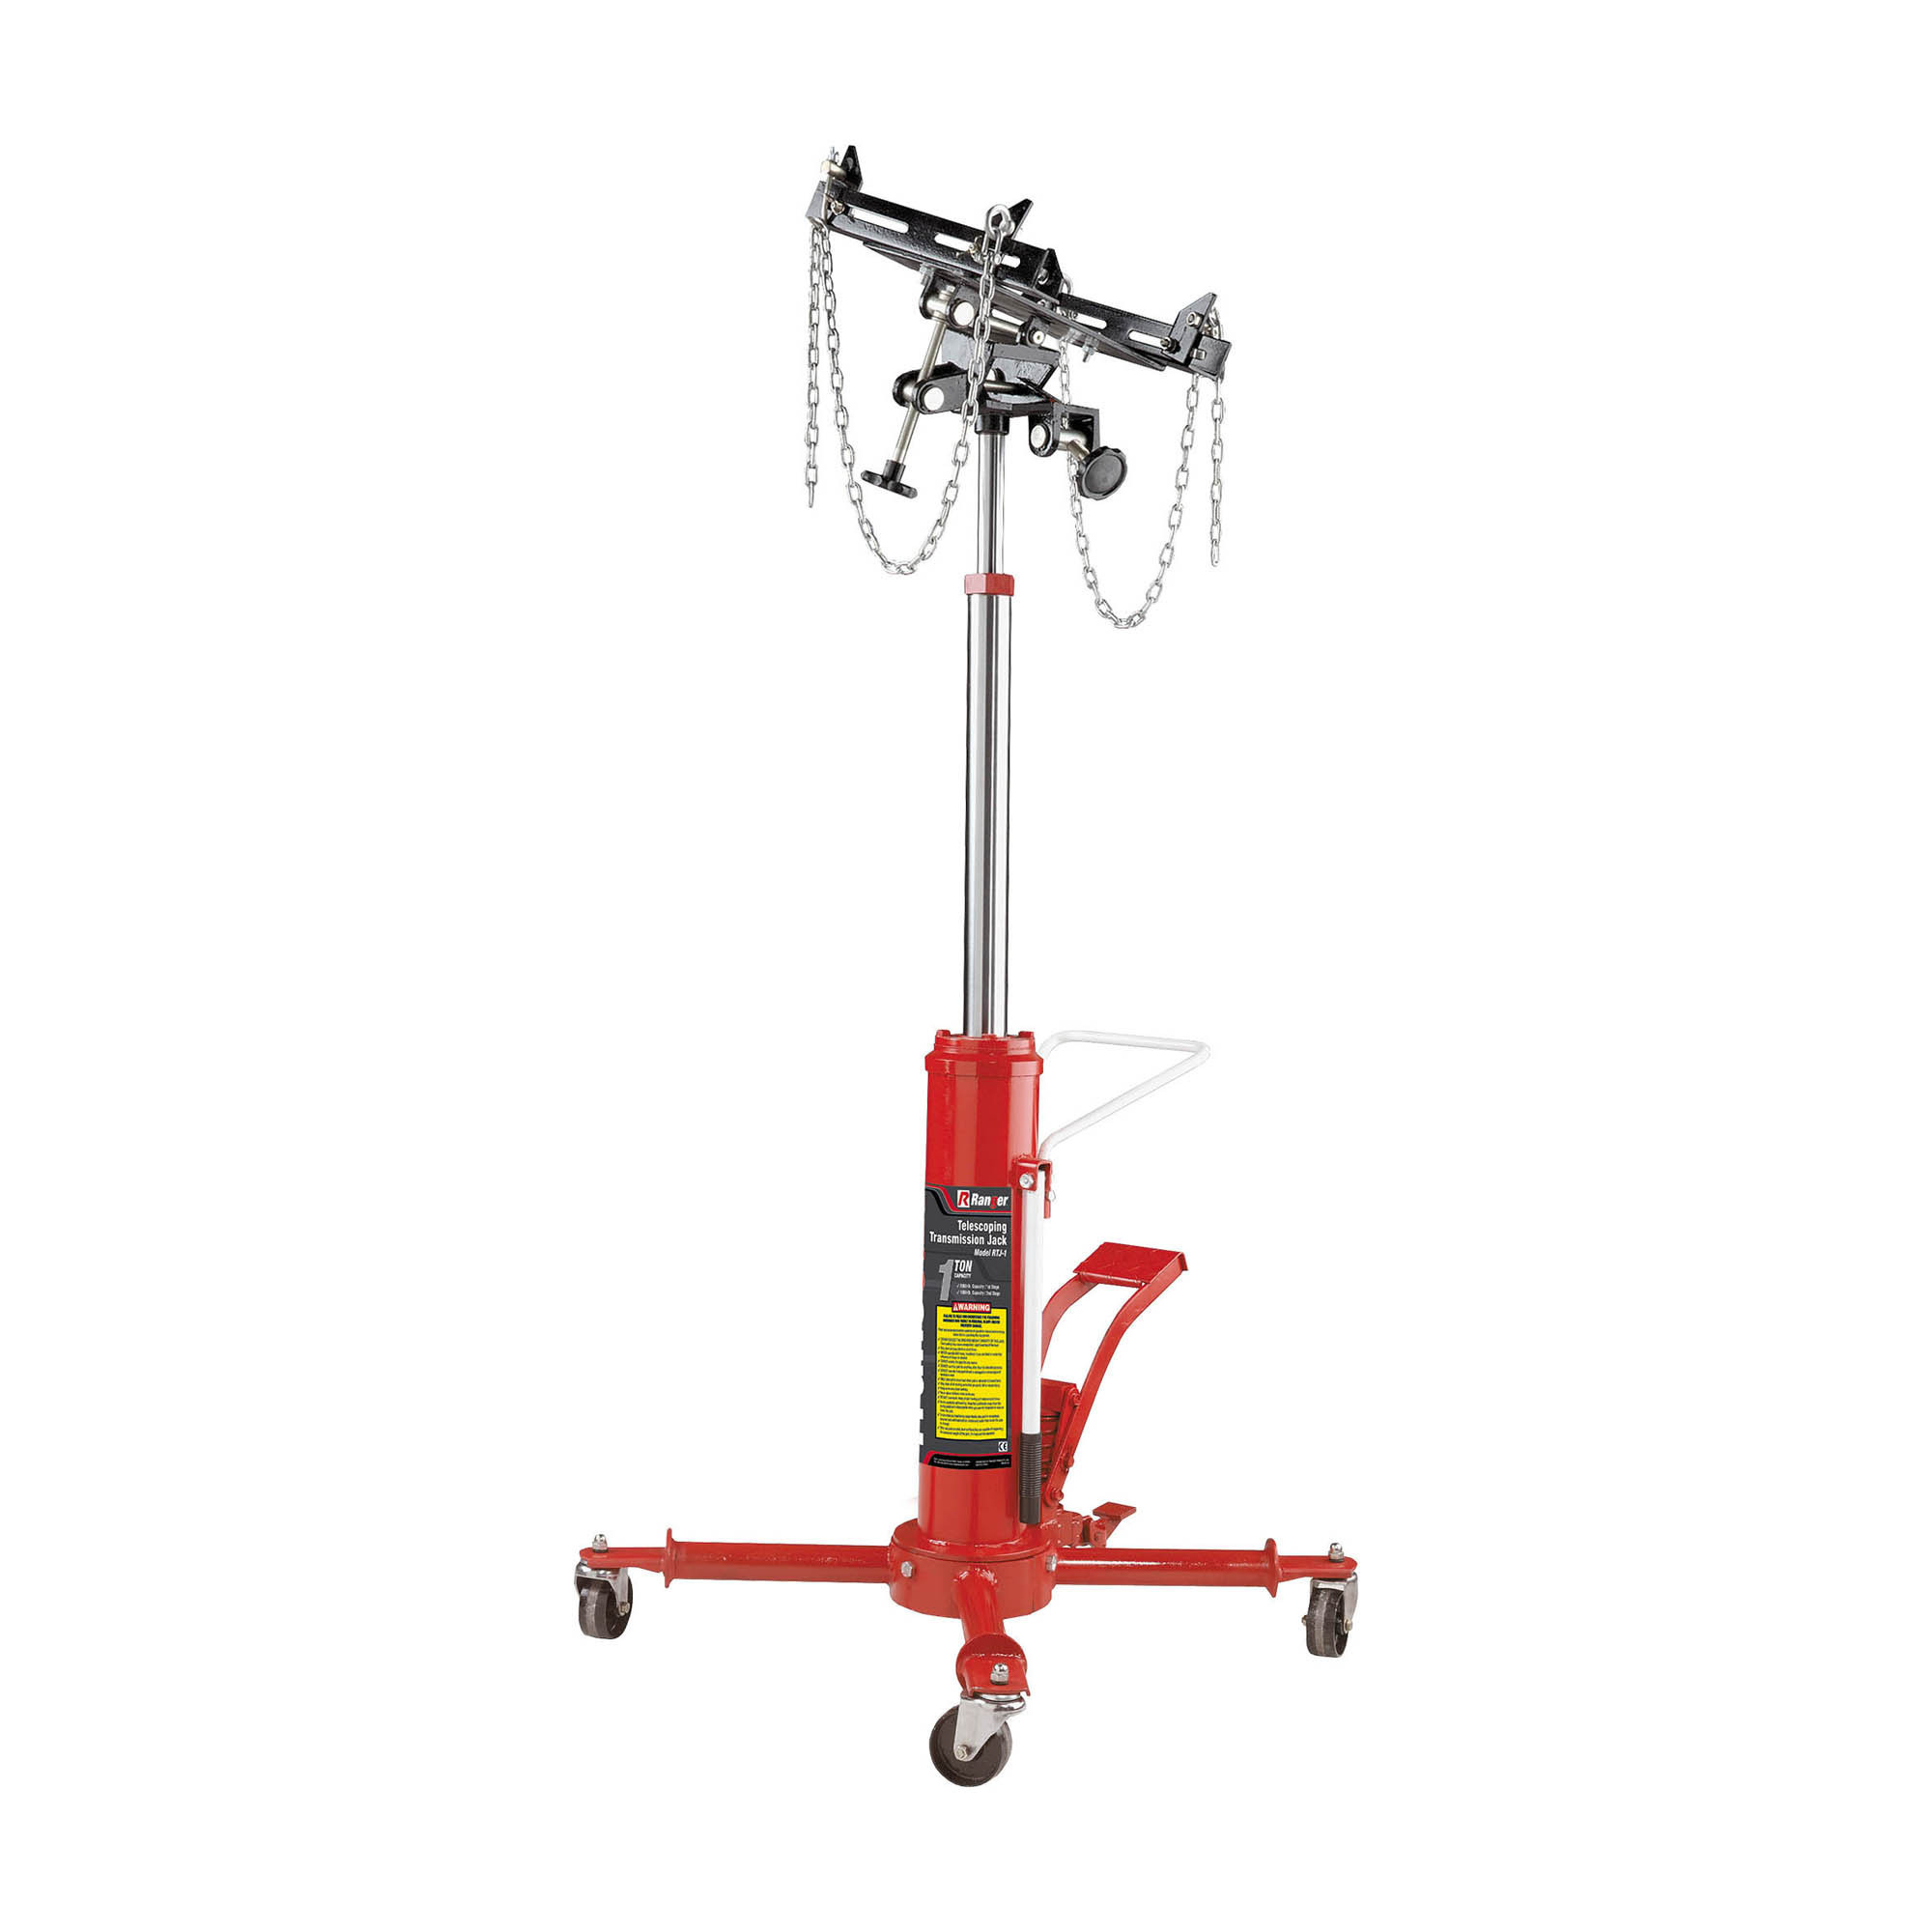 Ranger, 1-Ton Capacity Telescoping Transmission Jack, Lift Capacity 2000 lb, Max. Lift Height 73 in, MInch Lift Height 37 in, Model RTJ-1